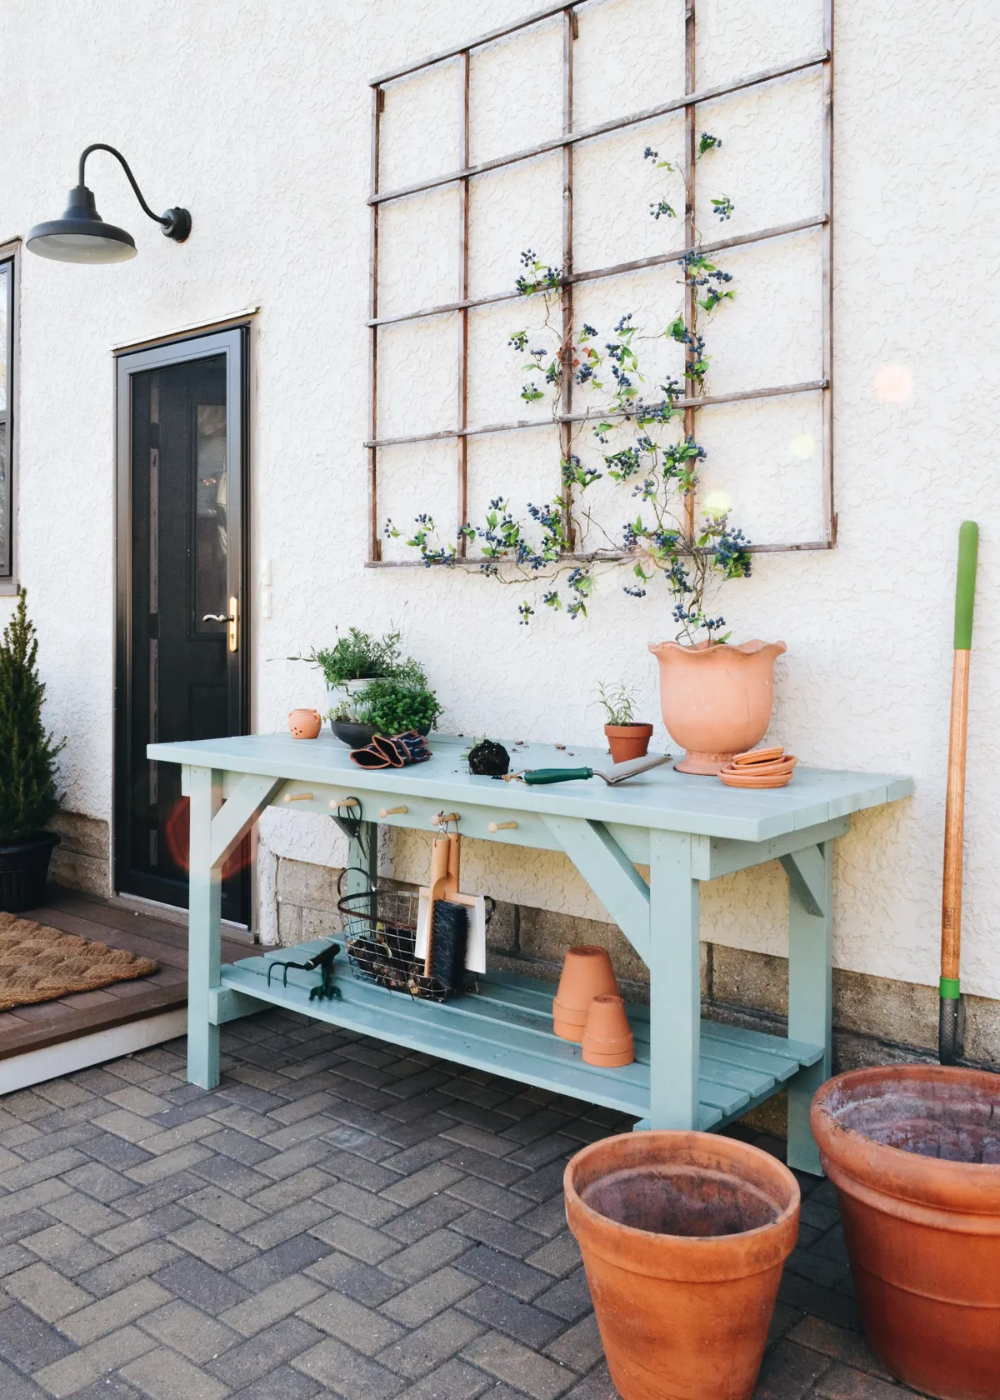 The Versatile Garden Planter Table: A Functional and Stylish Addition to Your Outdoor Space